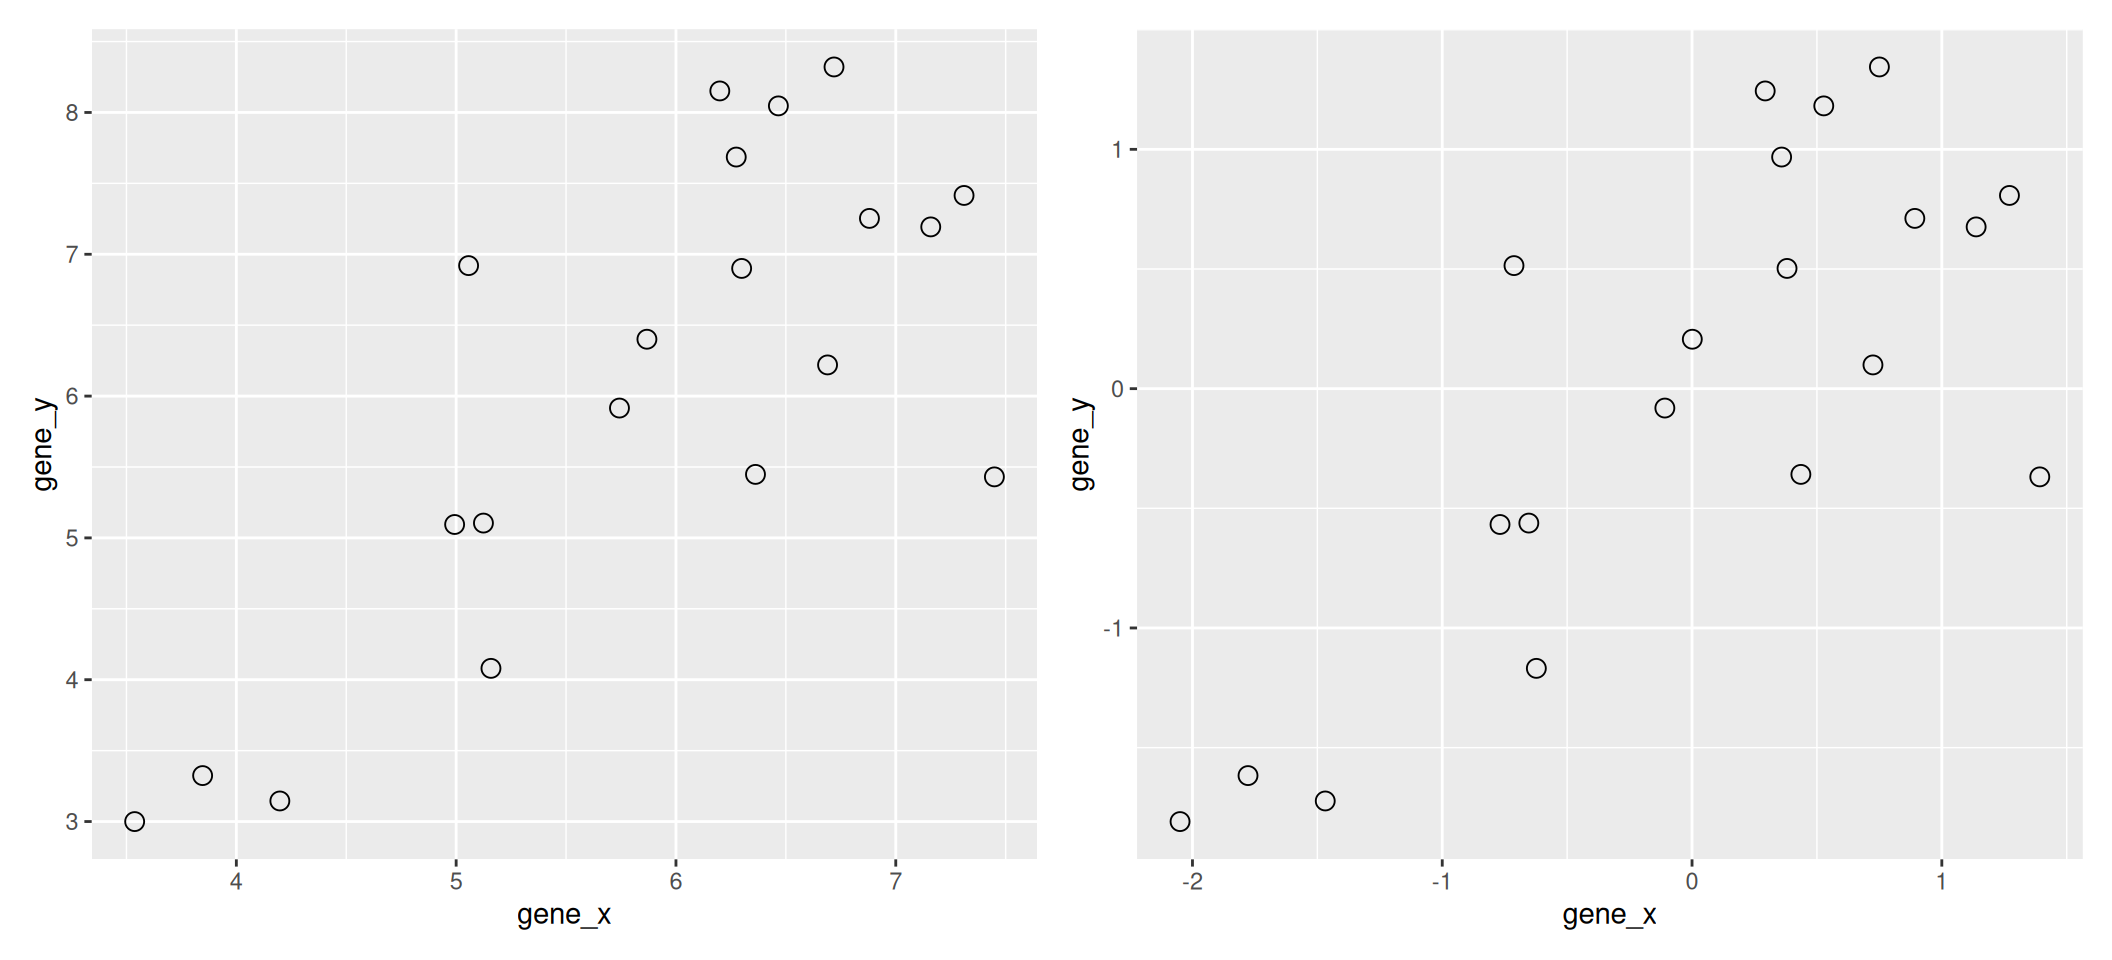 Raw (left) and scale/centred (right) expression data for genes *x* and *y* in 20 samples